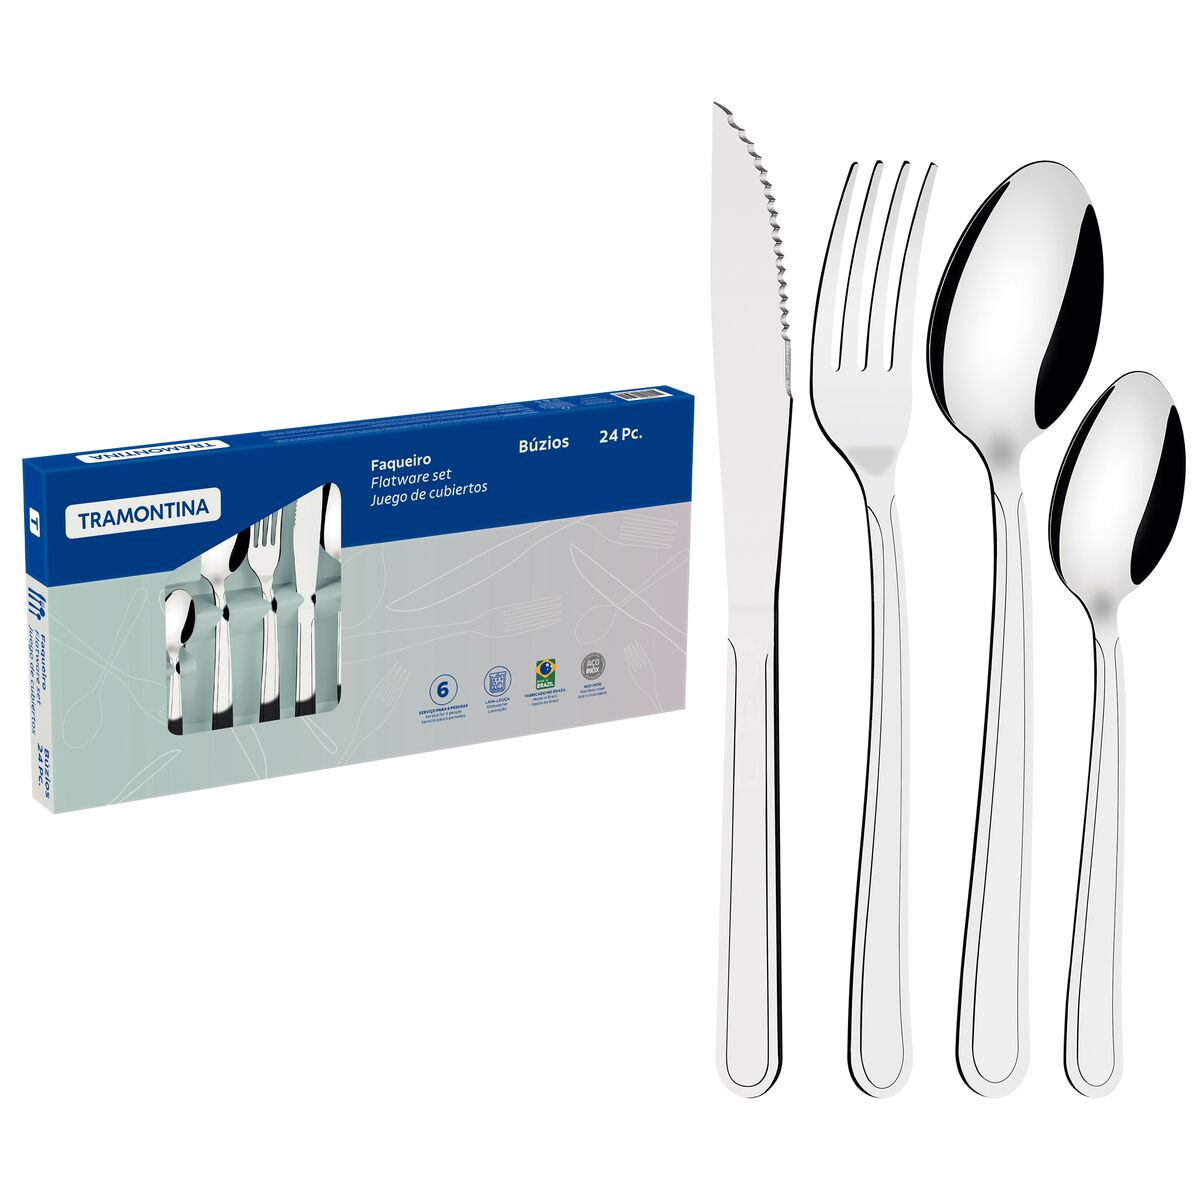 Tramontina Búzios stainless steel flatware set with detailing, 24 pcs